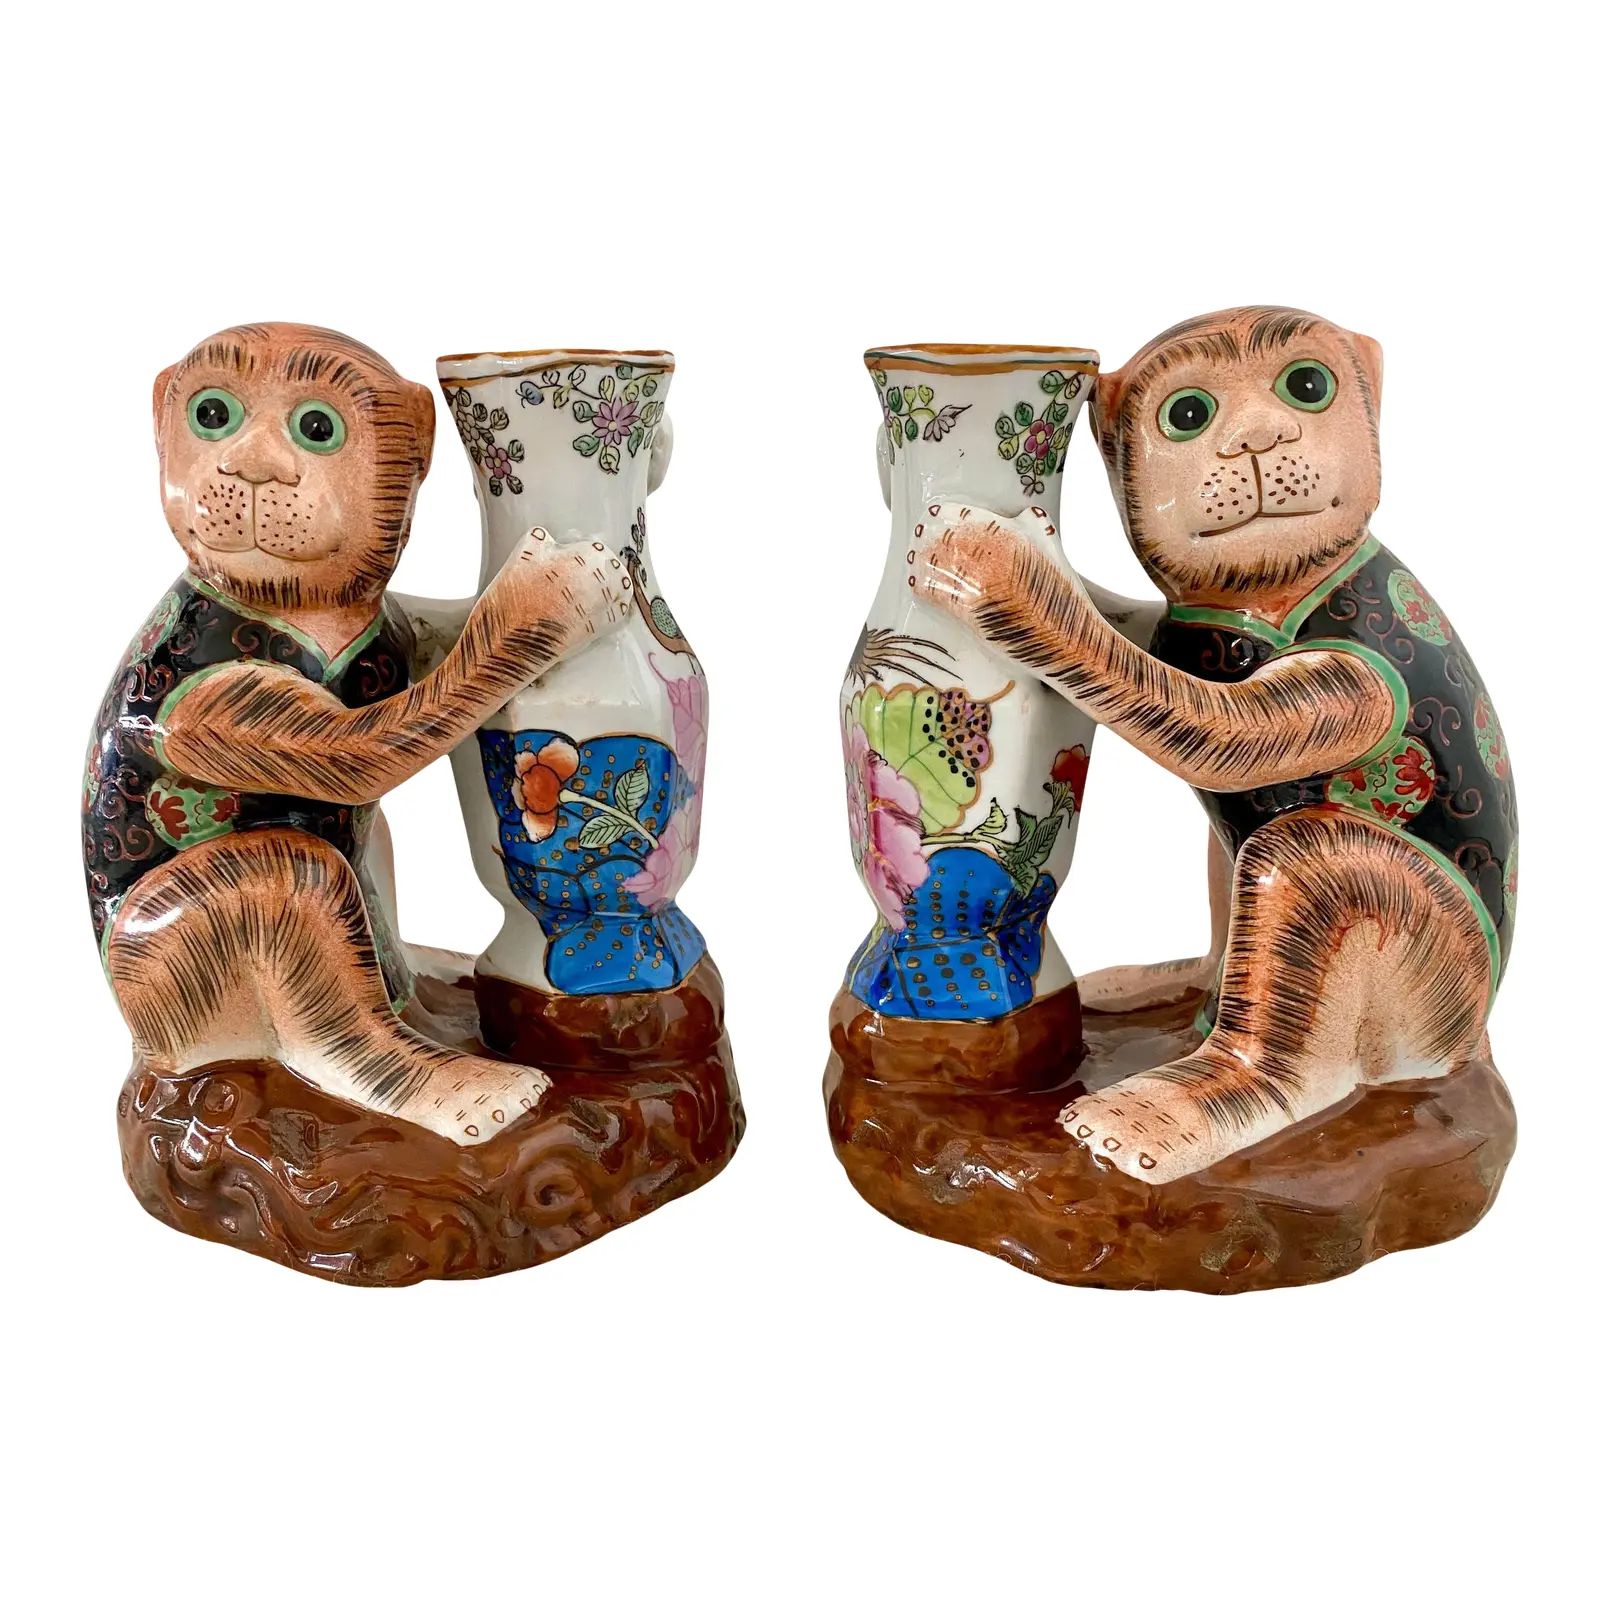 Vintage Early 20th Century Porcelain Monkey Vases with Tobacco Leaf Design - a Pair | Chairish